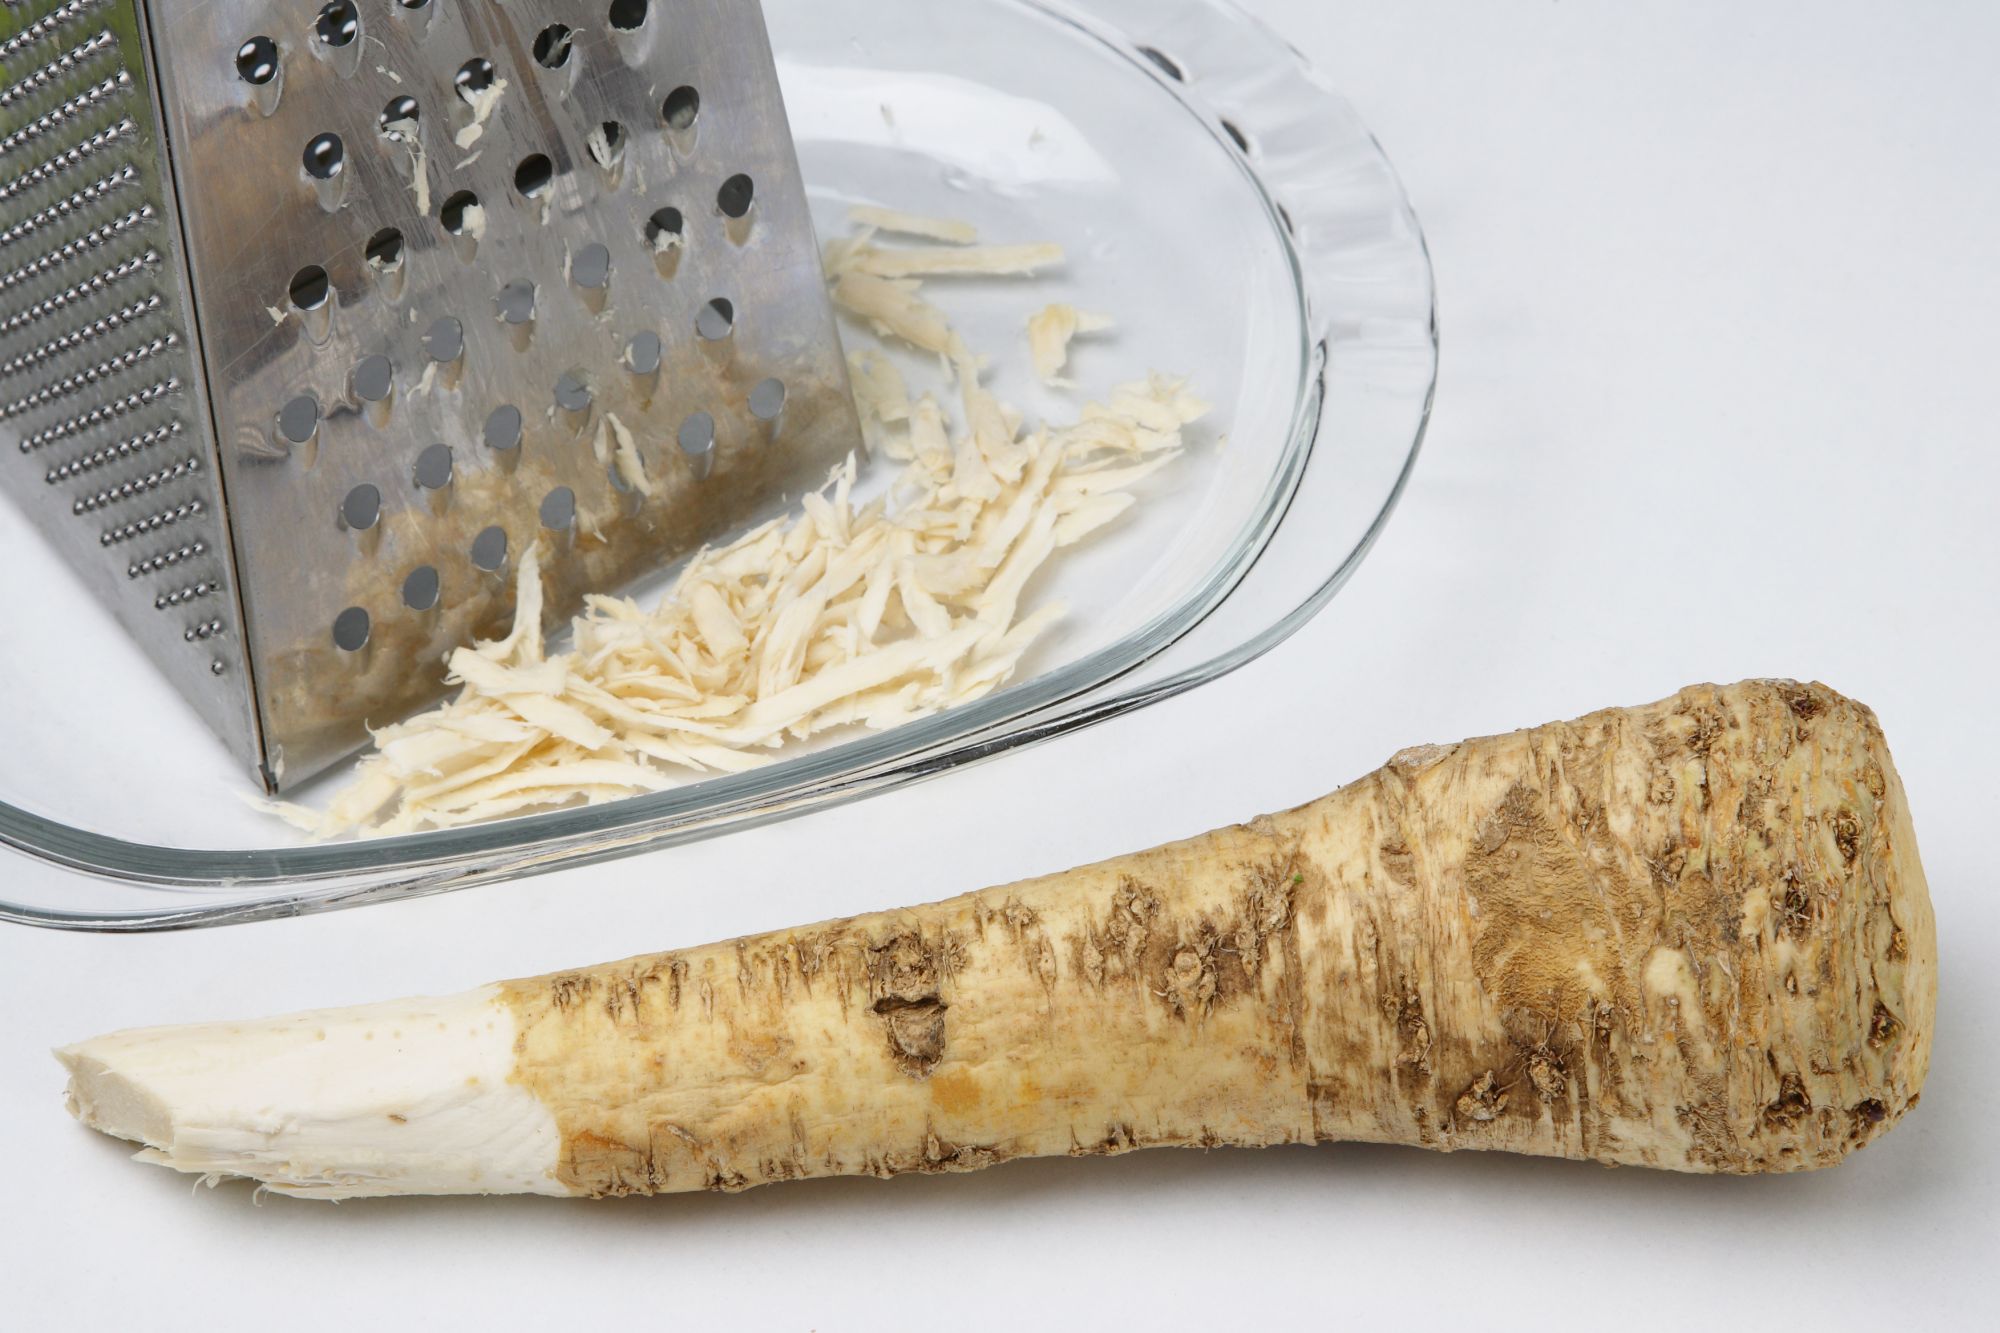 What diseases can you treat with horseradish?